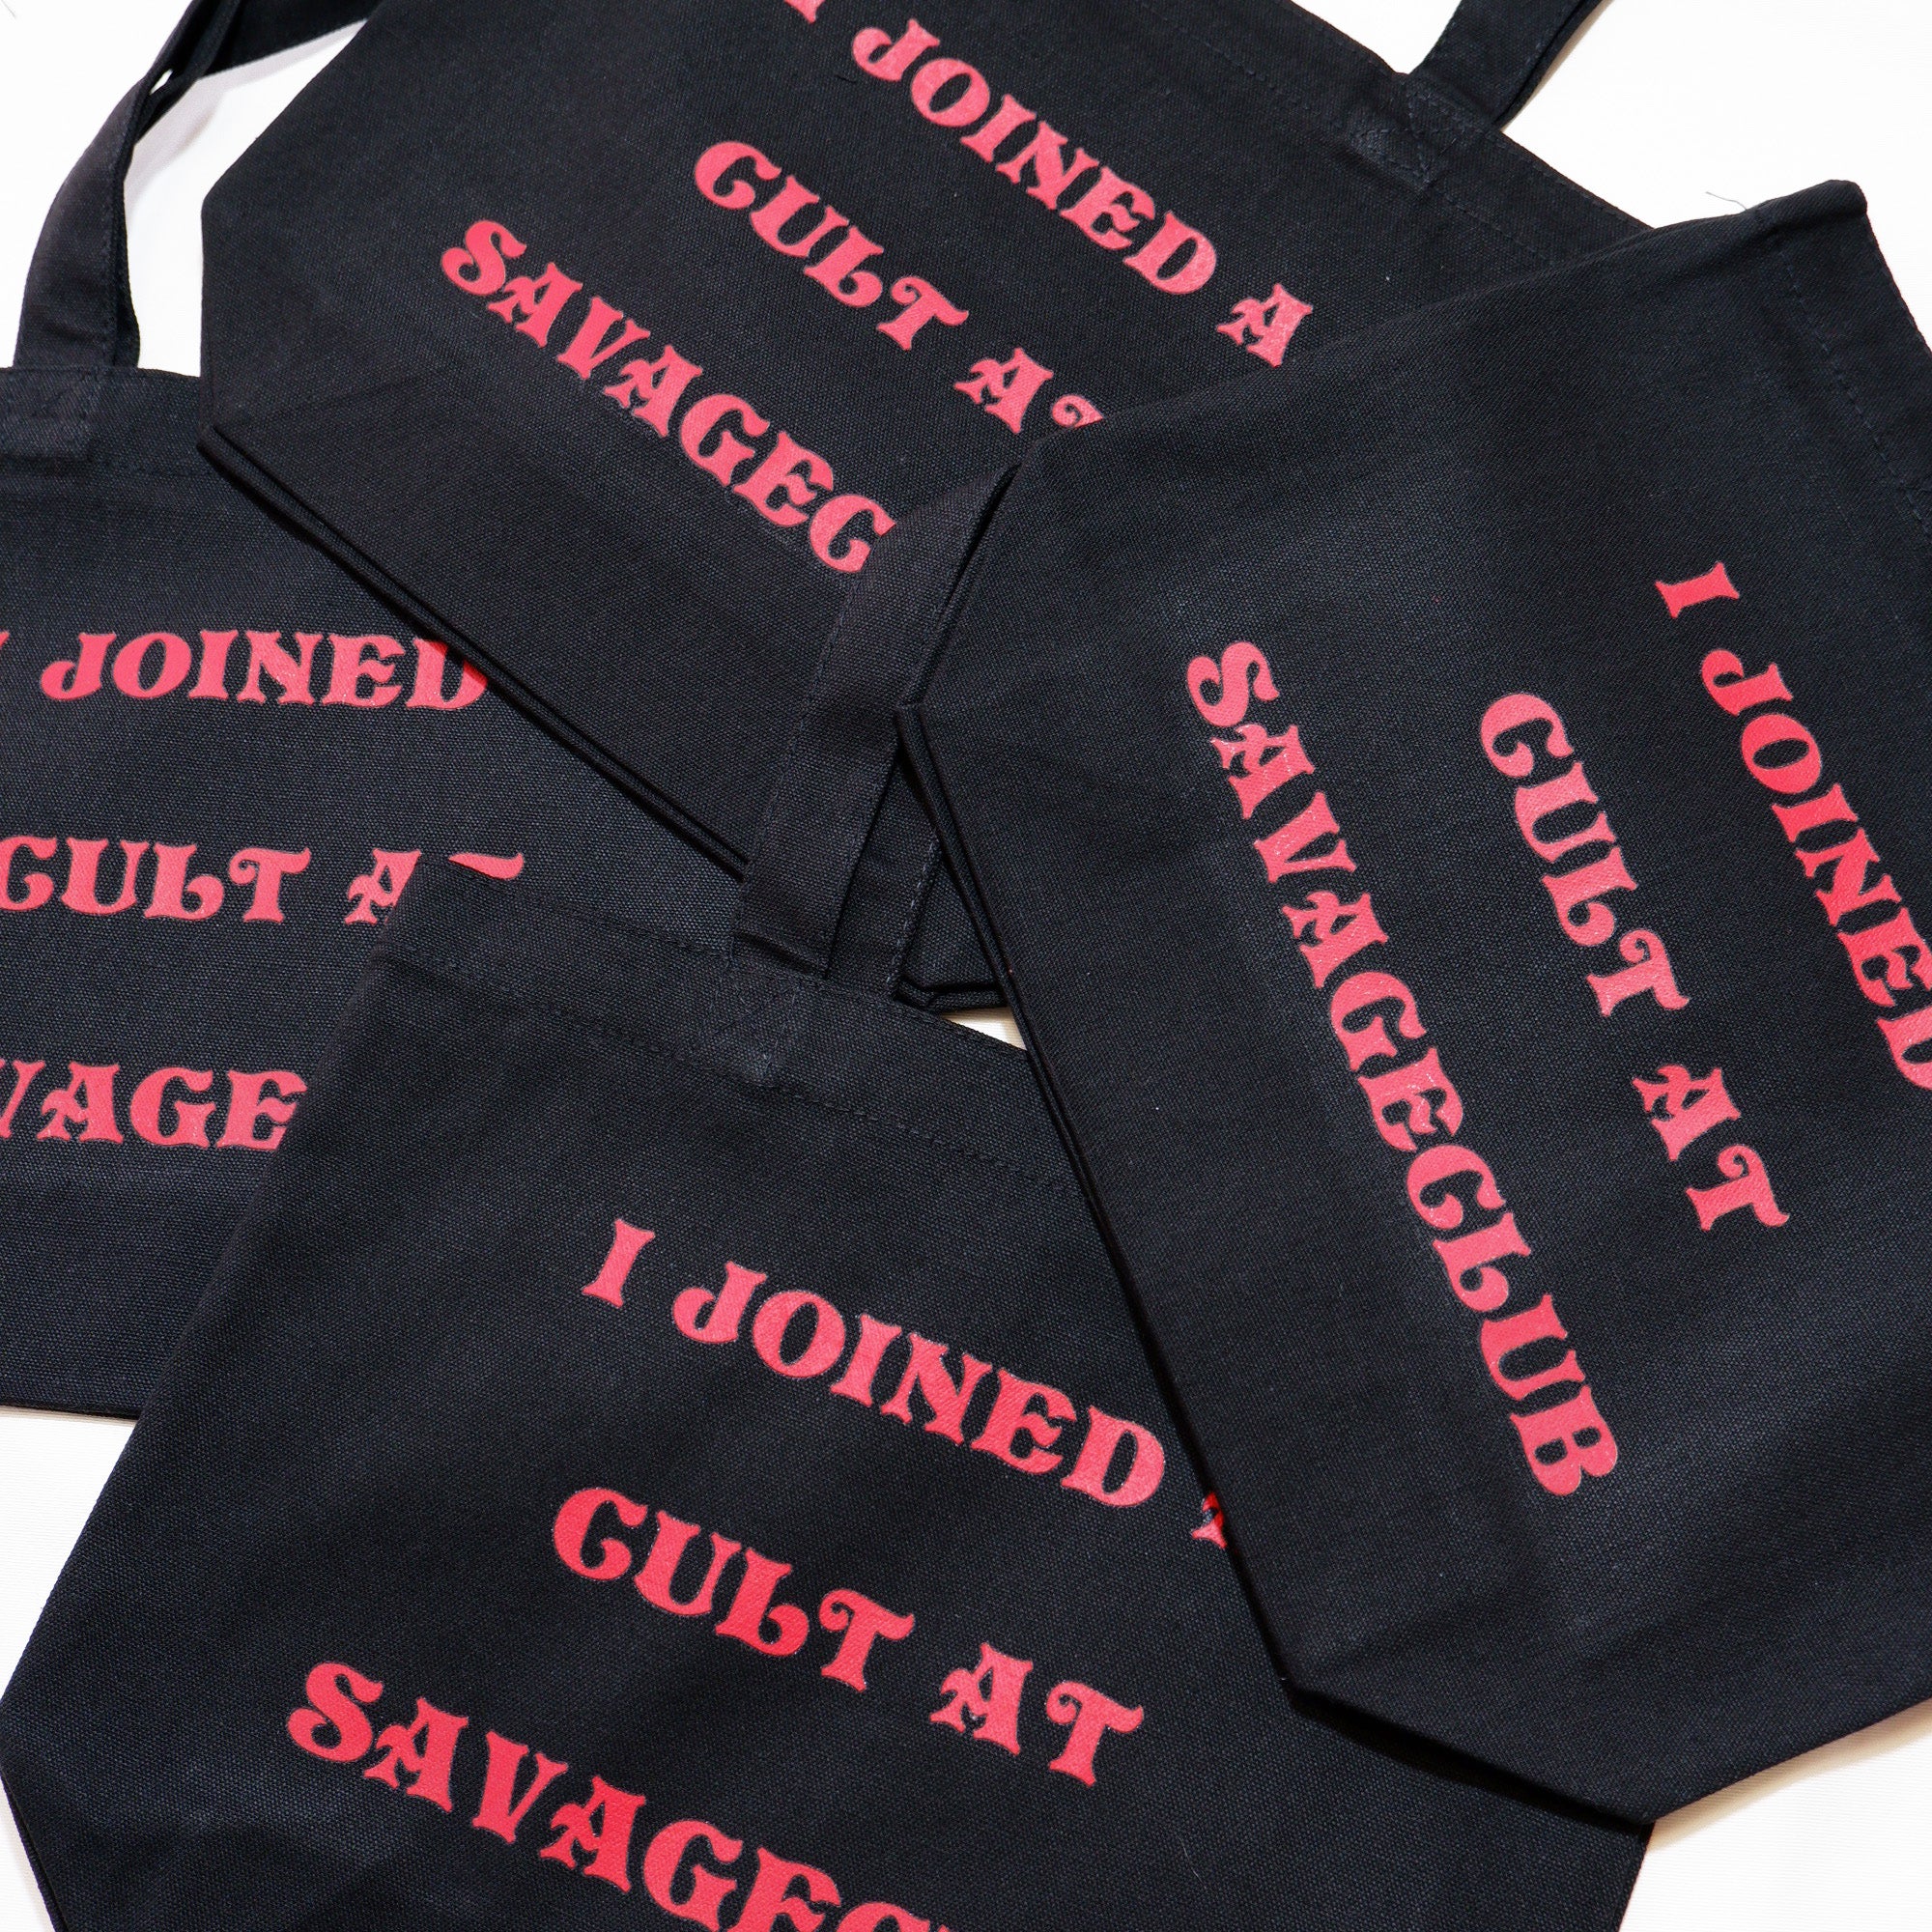 I JOINED A CULT AT SVG Tote bag